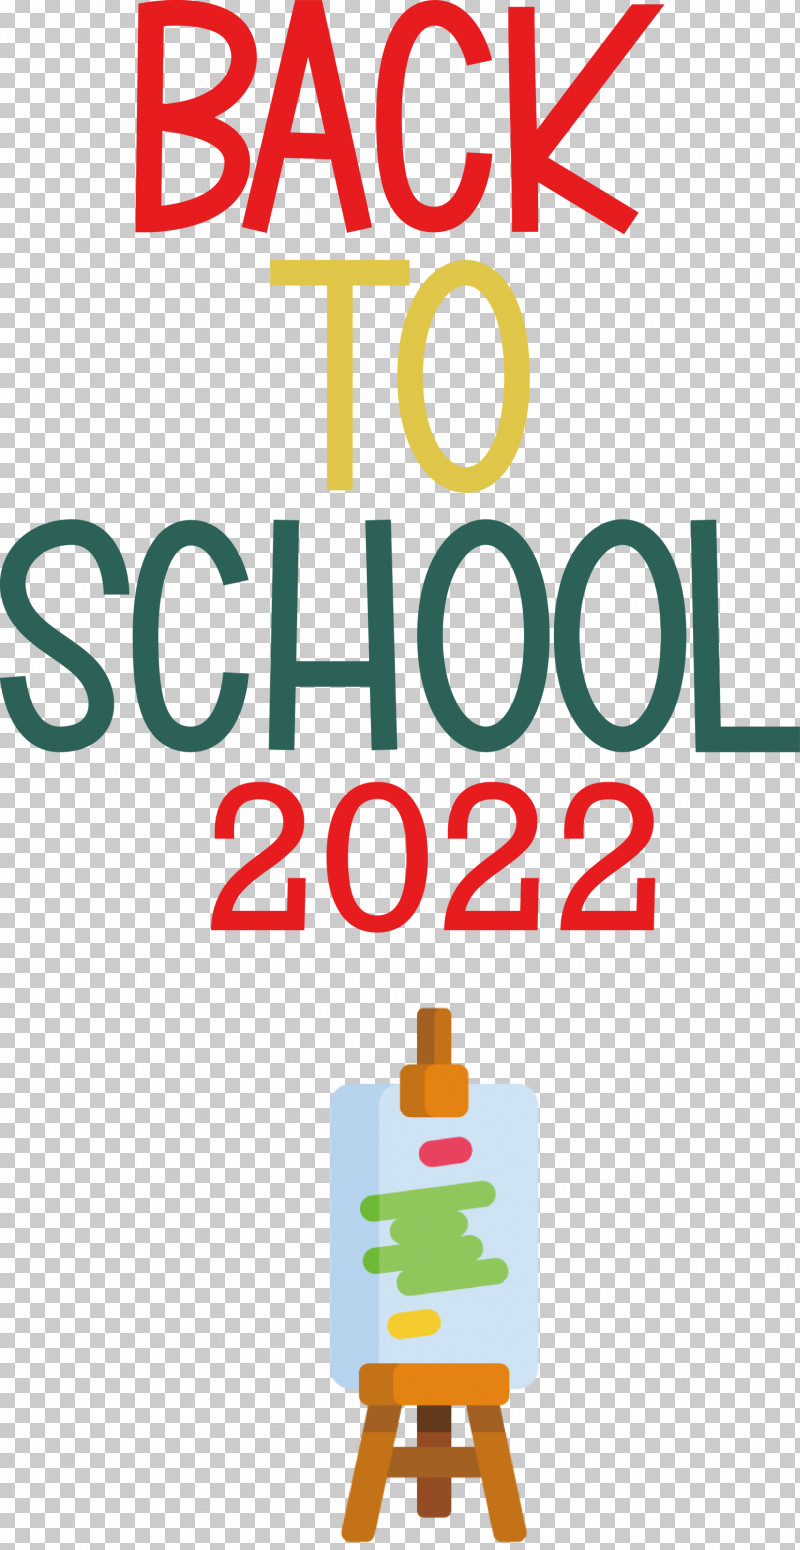 Back To School 2022 PNG, Clipart, Behavior, Human, Logo, Number, Text Free PNG Download